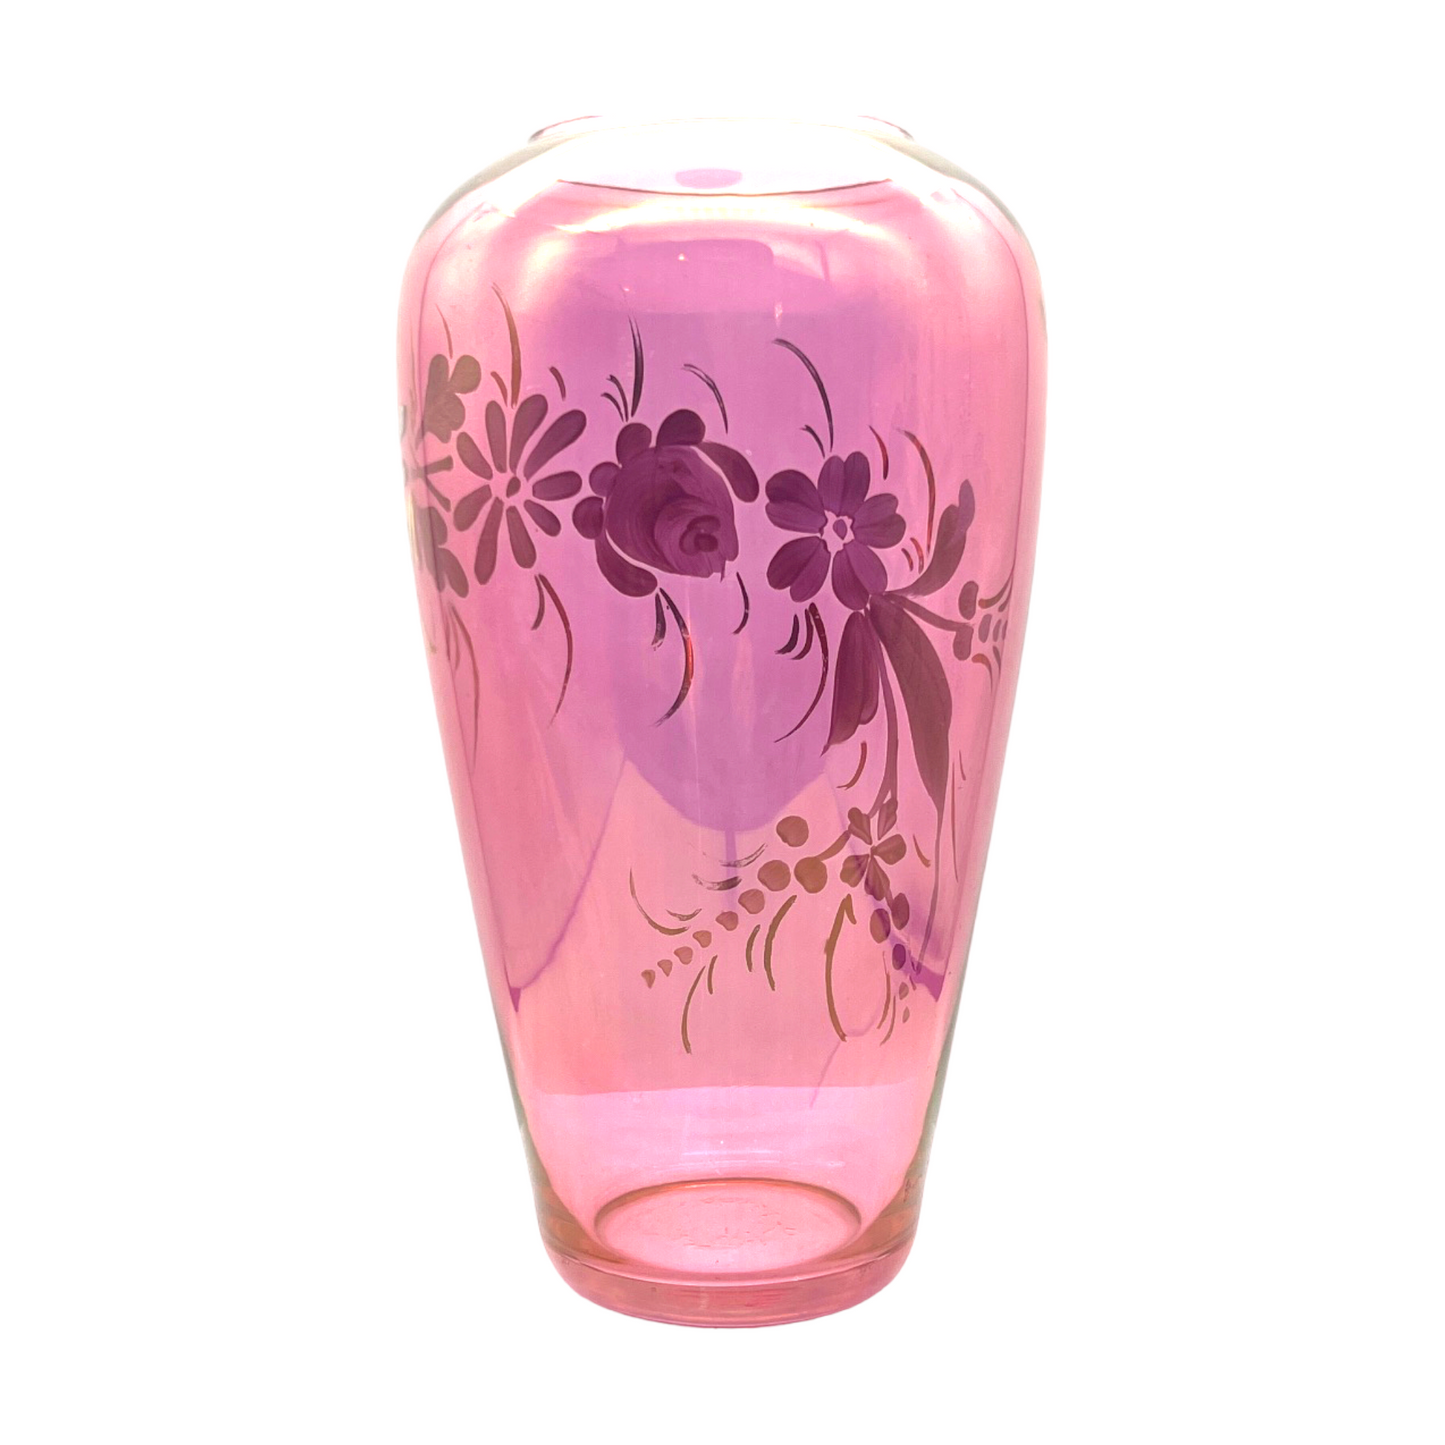 Elegant Vintage Cranberry Vase: Hand-Painted Beauty with Gold Accents